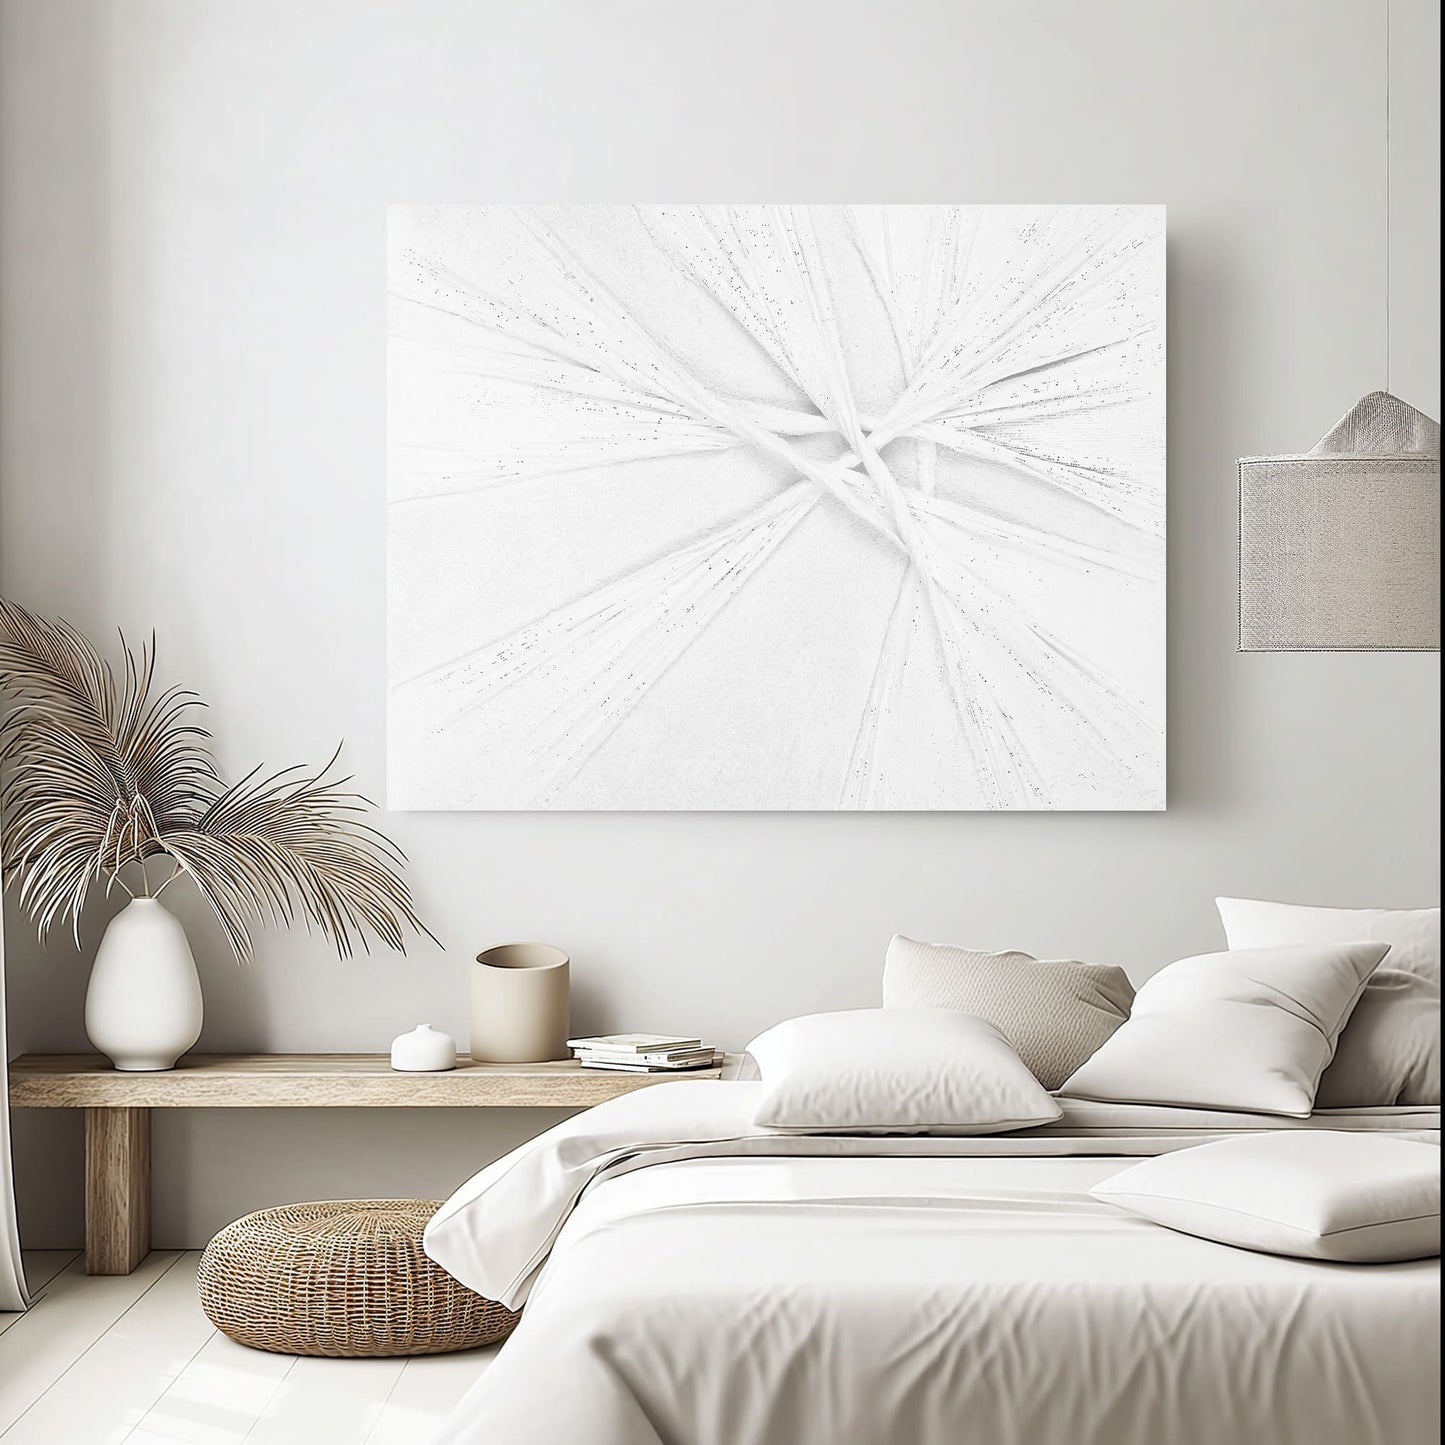 "INFINITE KNOTS: Hand-painted Landscape shape abstract texture wall art painting with a three-dimensional feel, in shades of white, hanging on the wall in the bedroom."